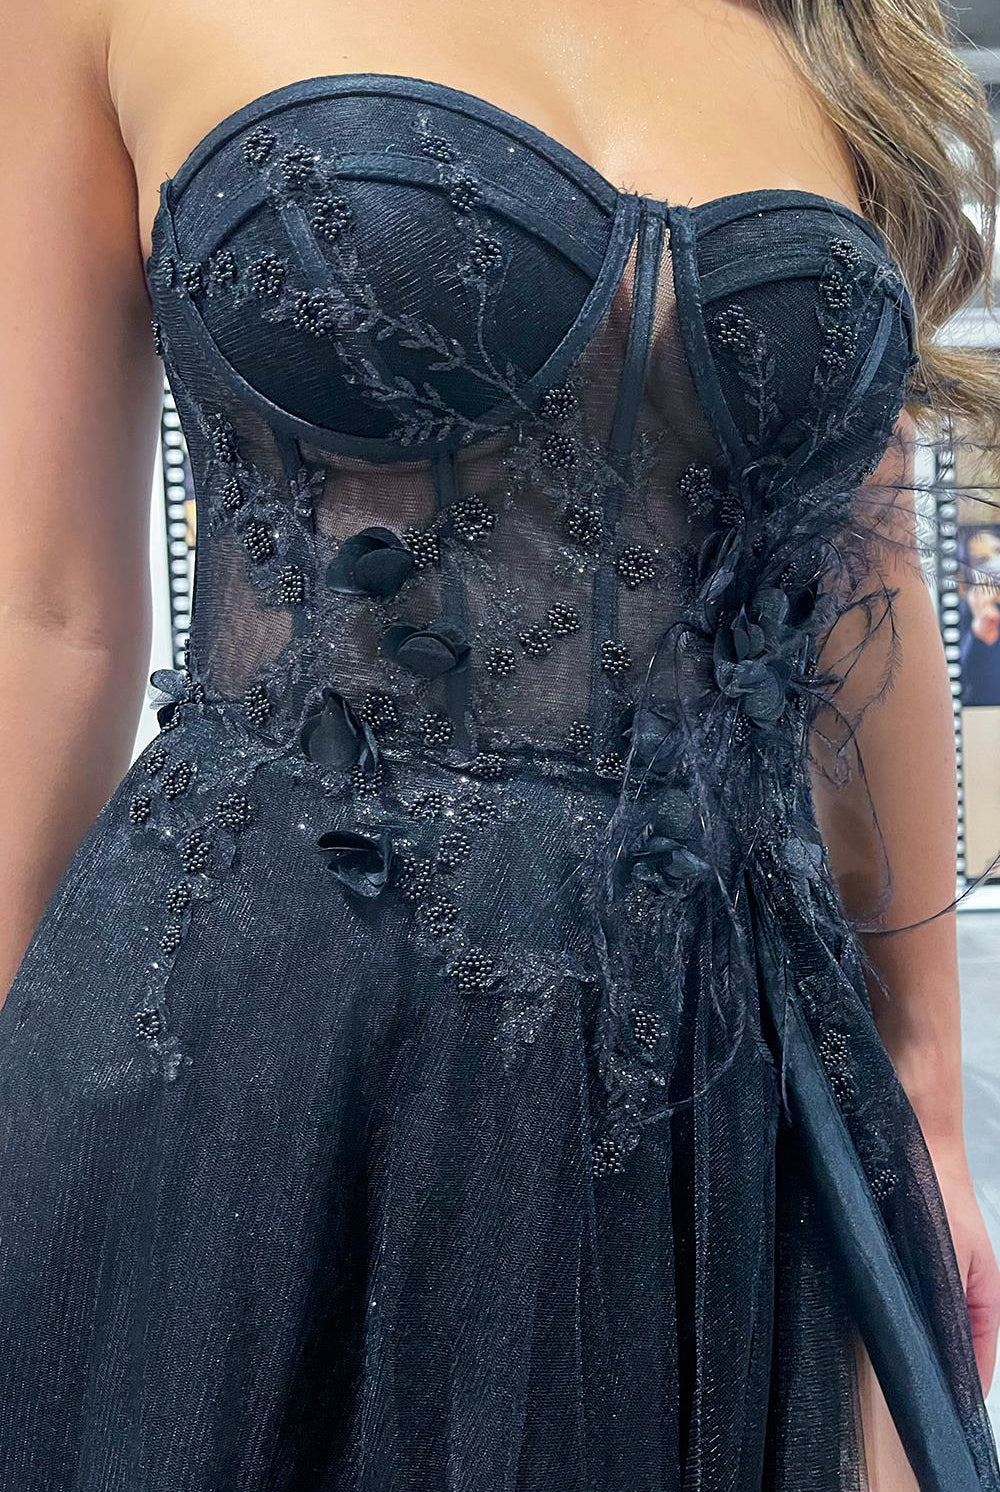 Strapless Embroidered Lace Sheer Bodice Long Prom Dress ACTM1015-Prom Dress-smcfashion.com